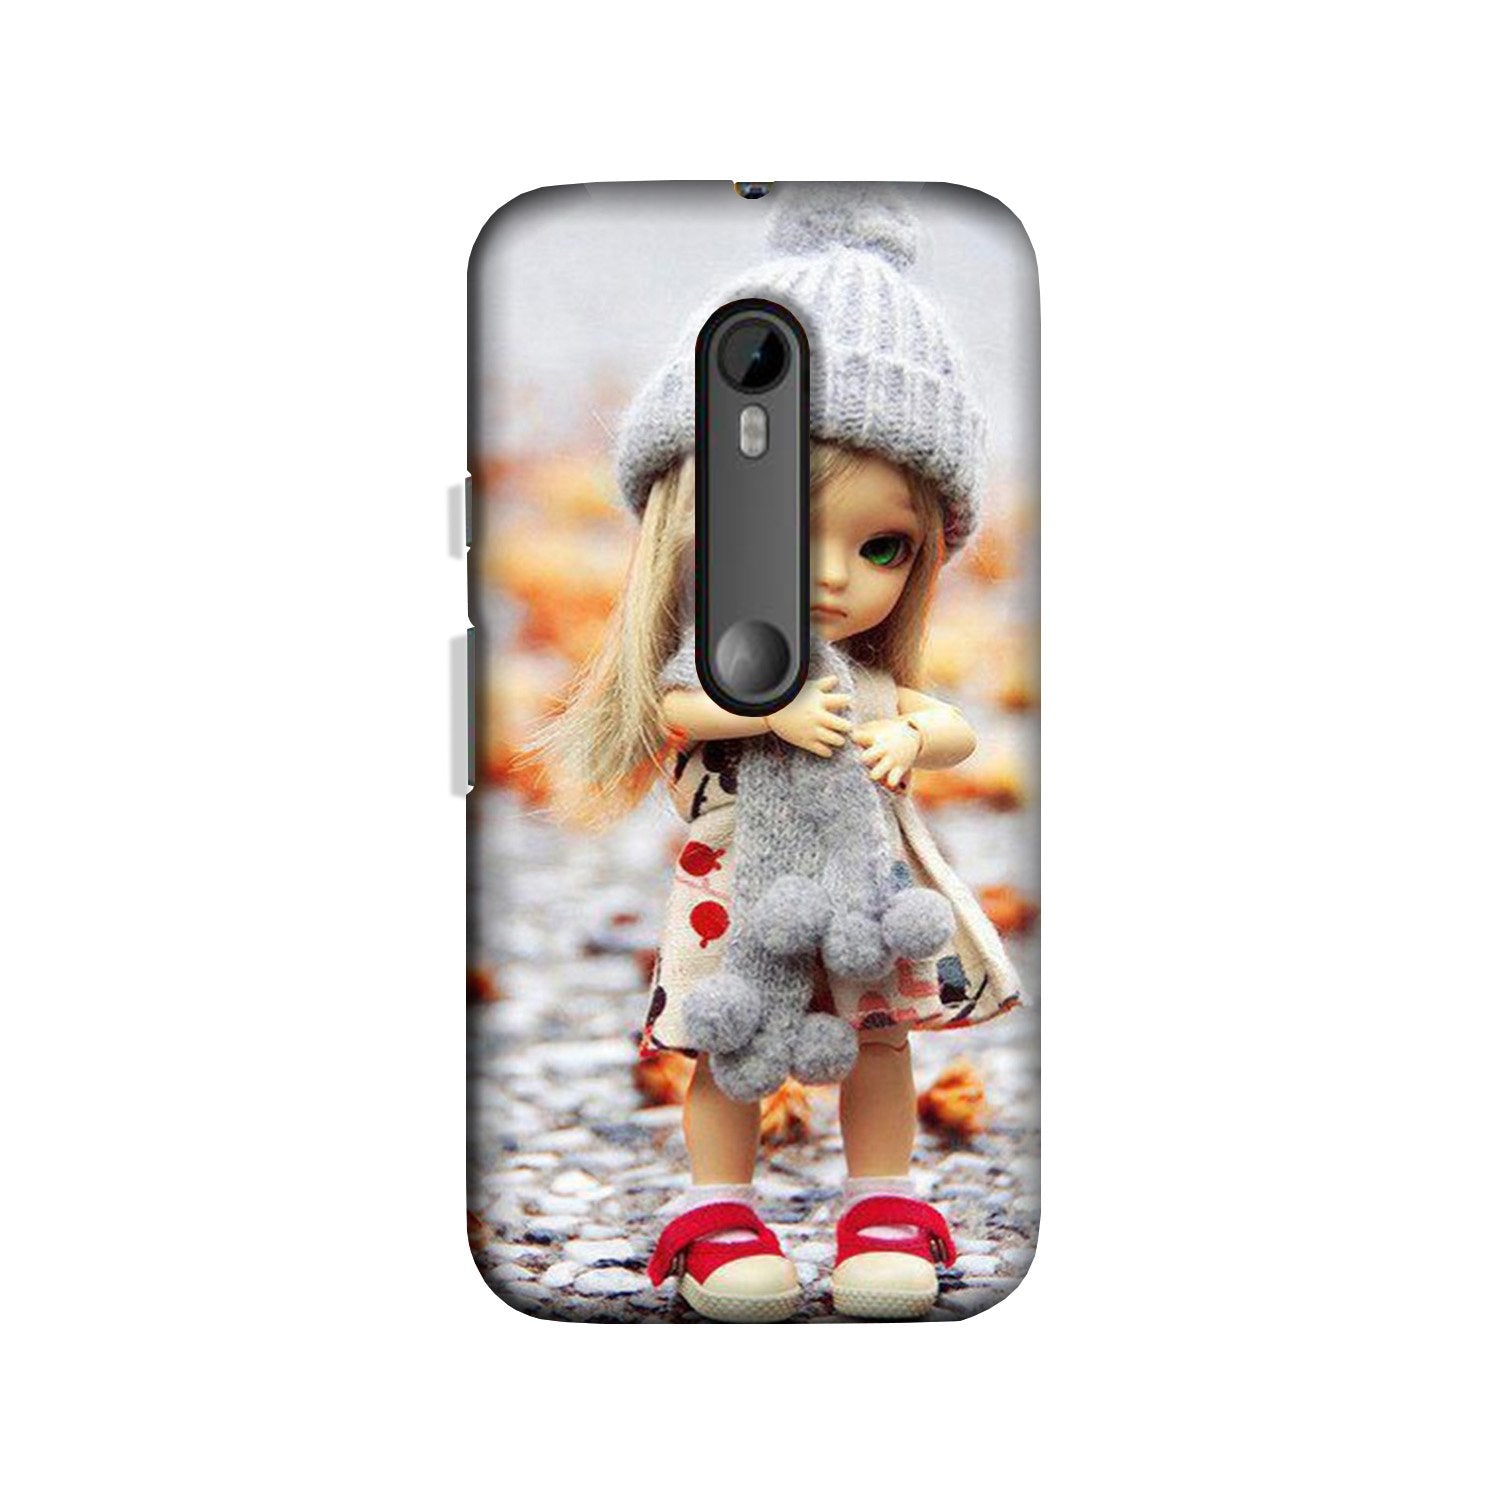 Cute Doll Case for Moto X Play